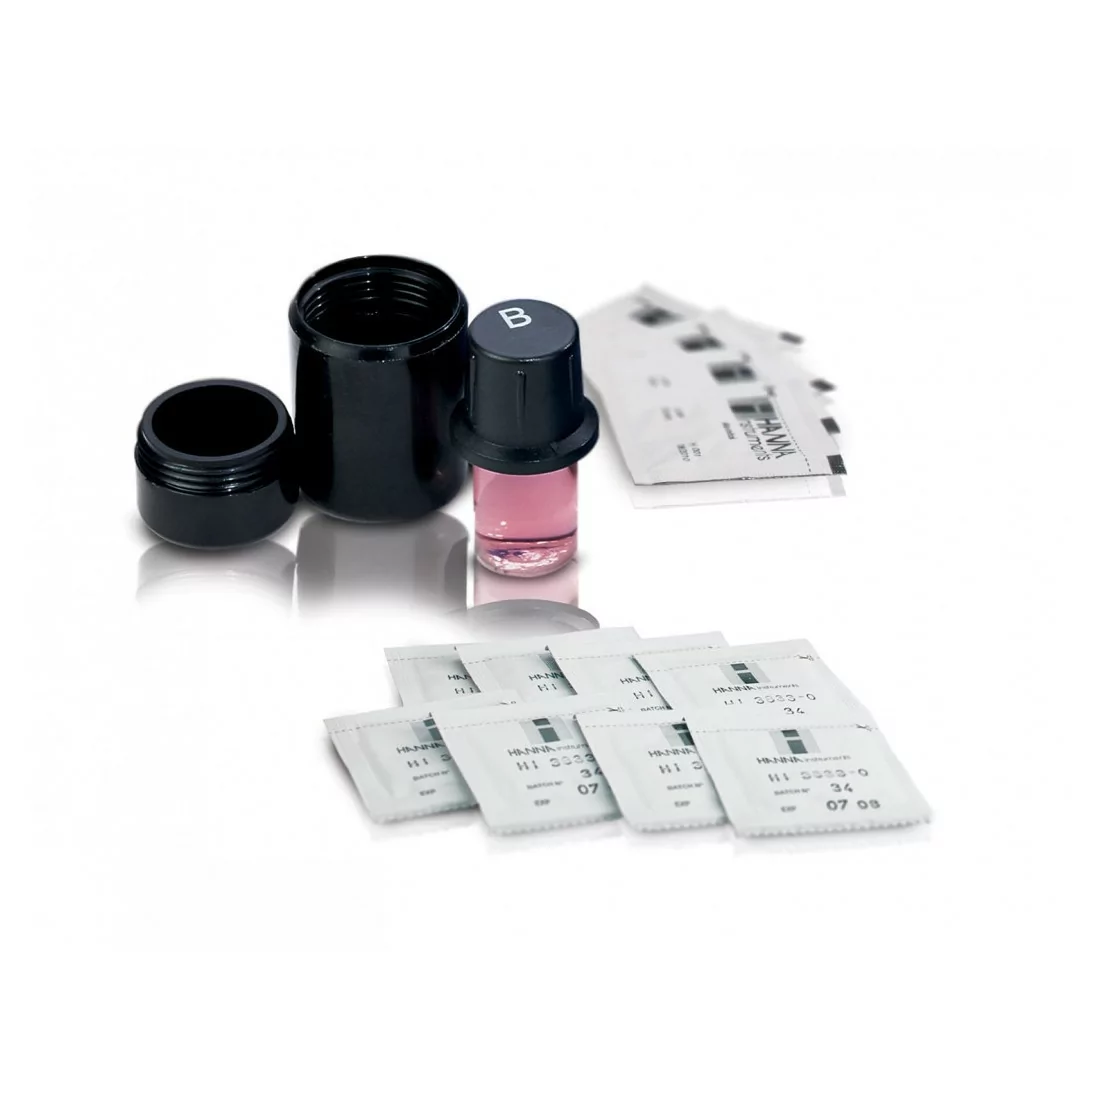 Reagents for Photometer series HI 83 and TI 96